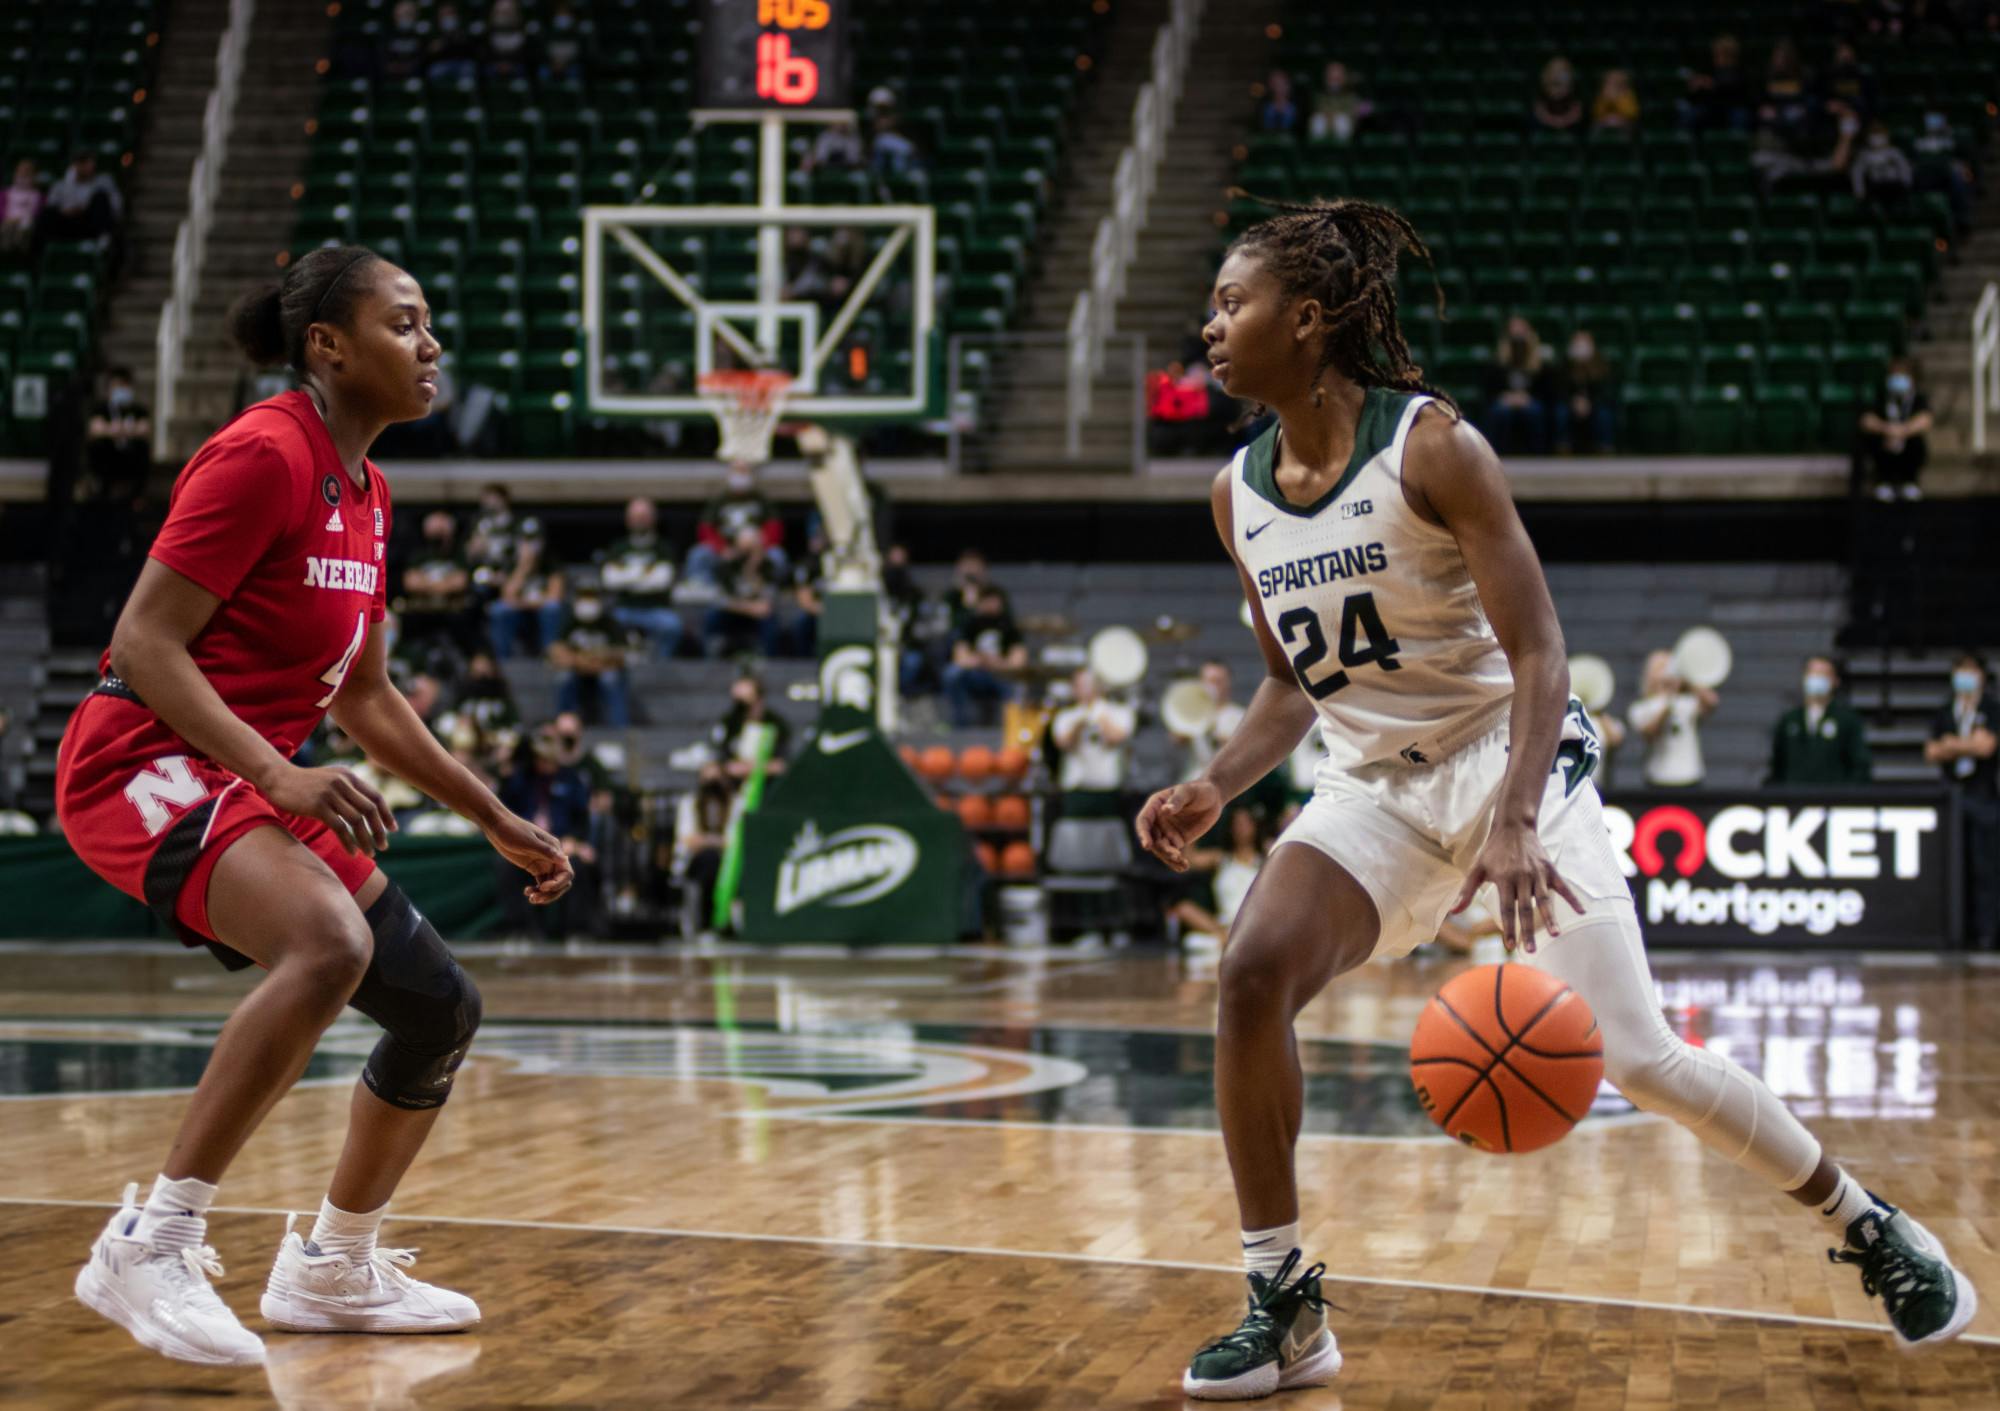 <p>Clouden (24) brings the ball in against the Nebraska Cornhuskers at the Breslin on Thursday, Dec. 30, 2021.</p>